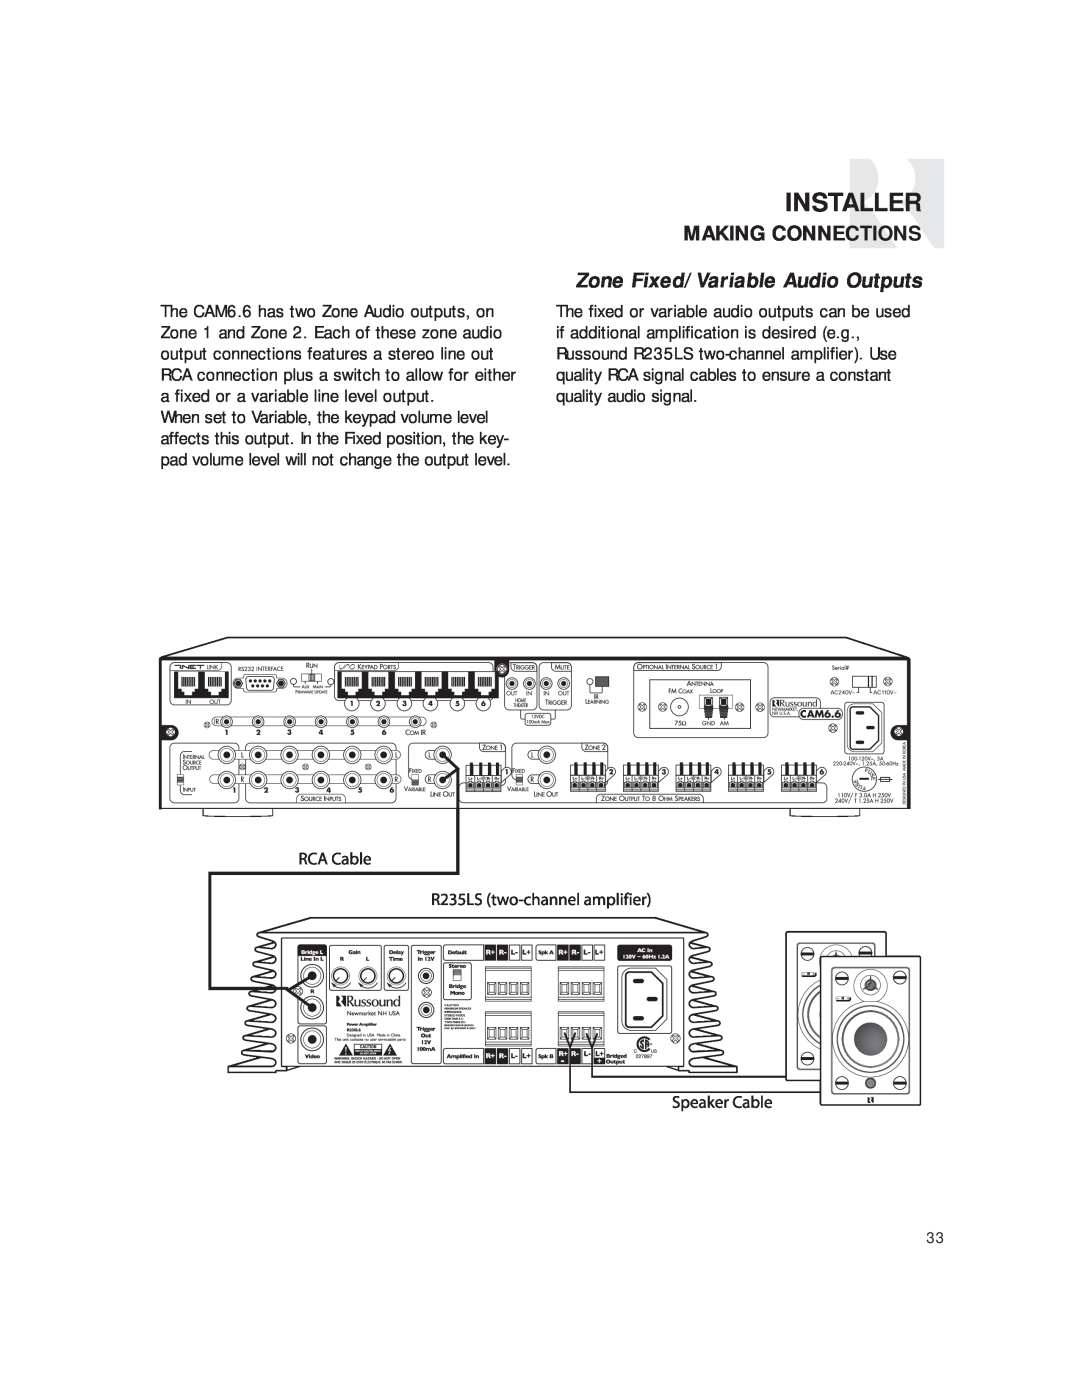 Russound CAM6.6T-S1 instruction manual Zone Fixed/Variable Audio Outputs, Installer, Making Connections 